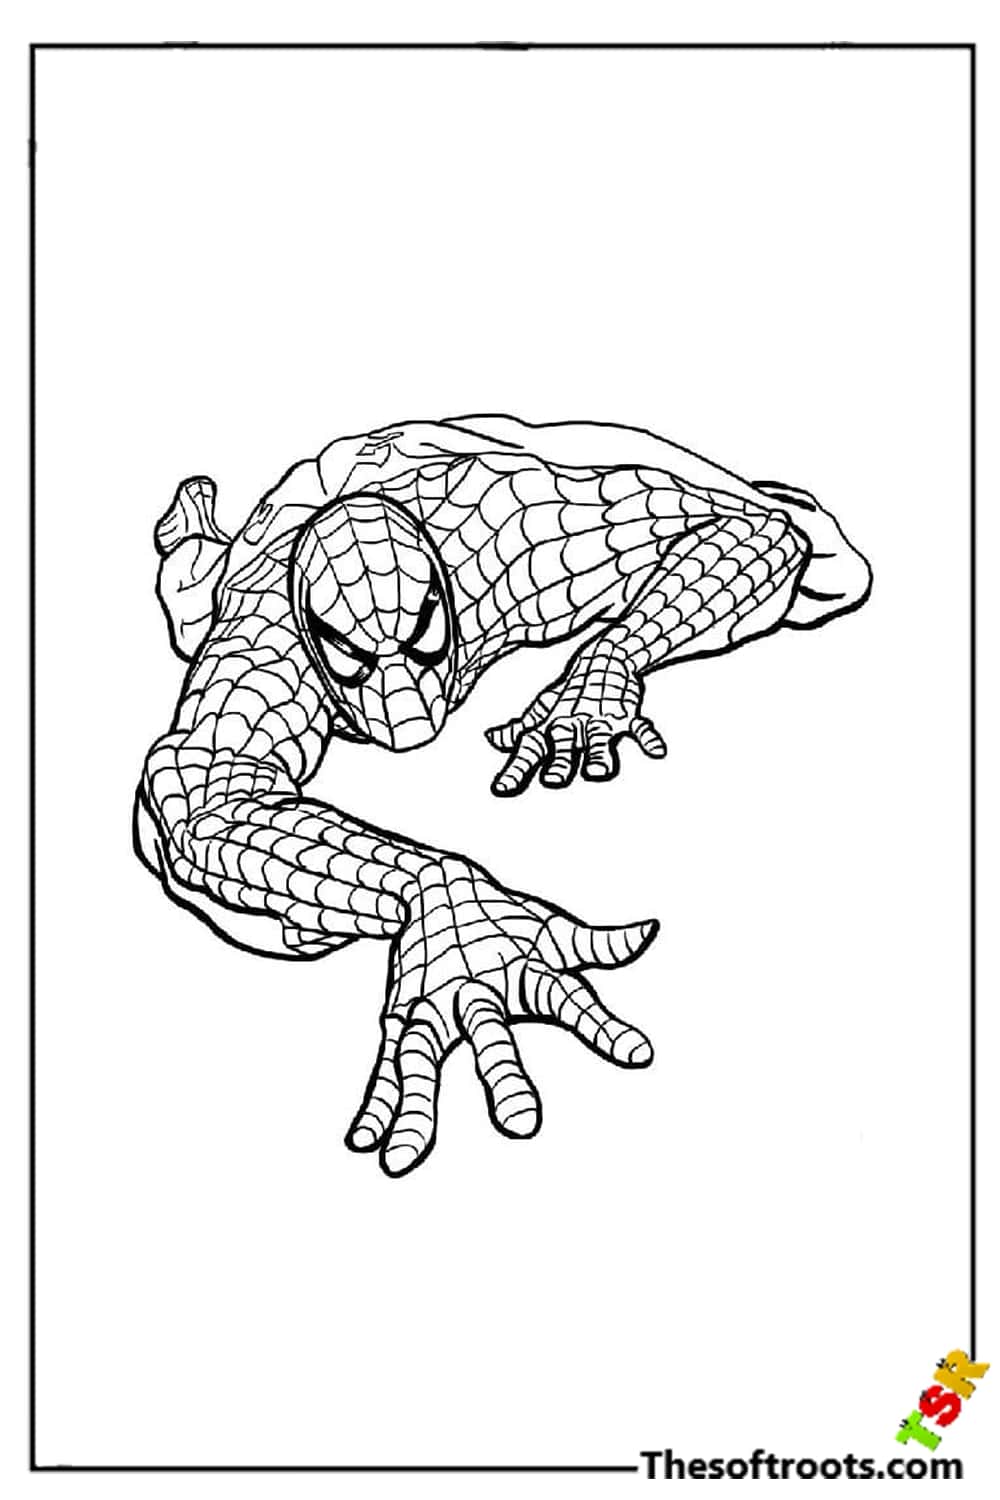 Crawling Spiderman coloring pages